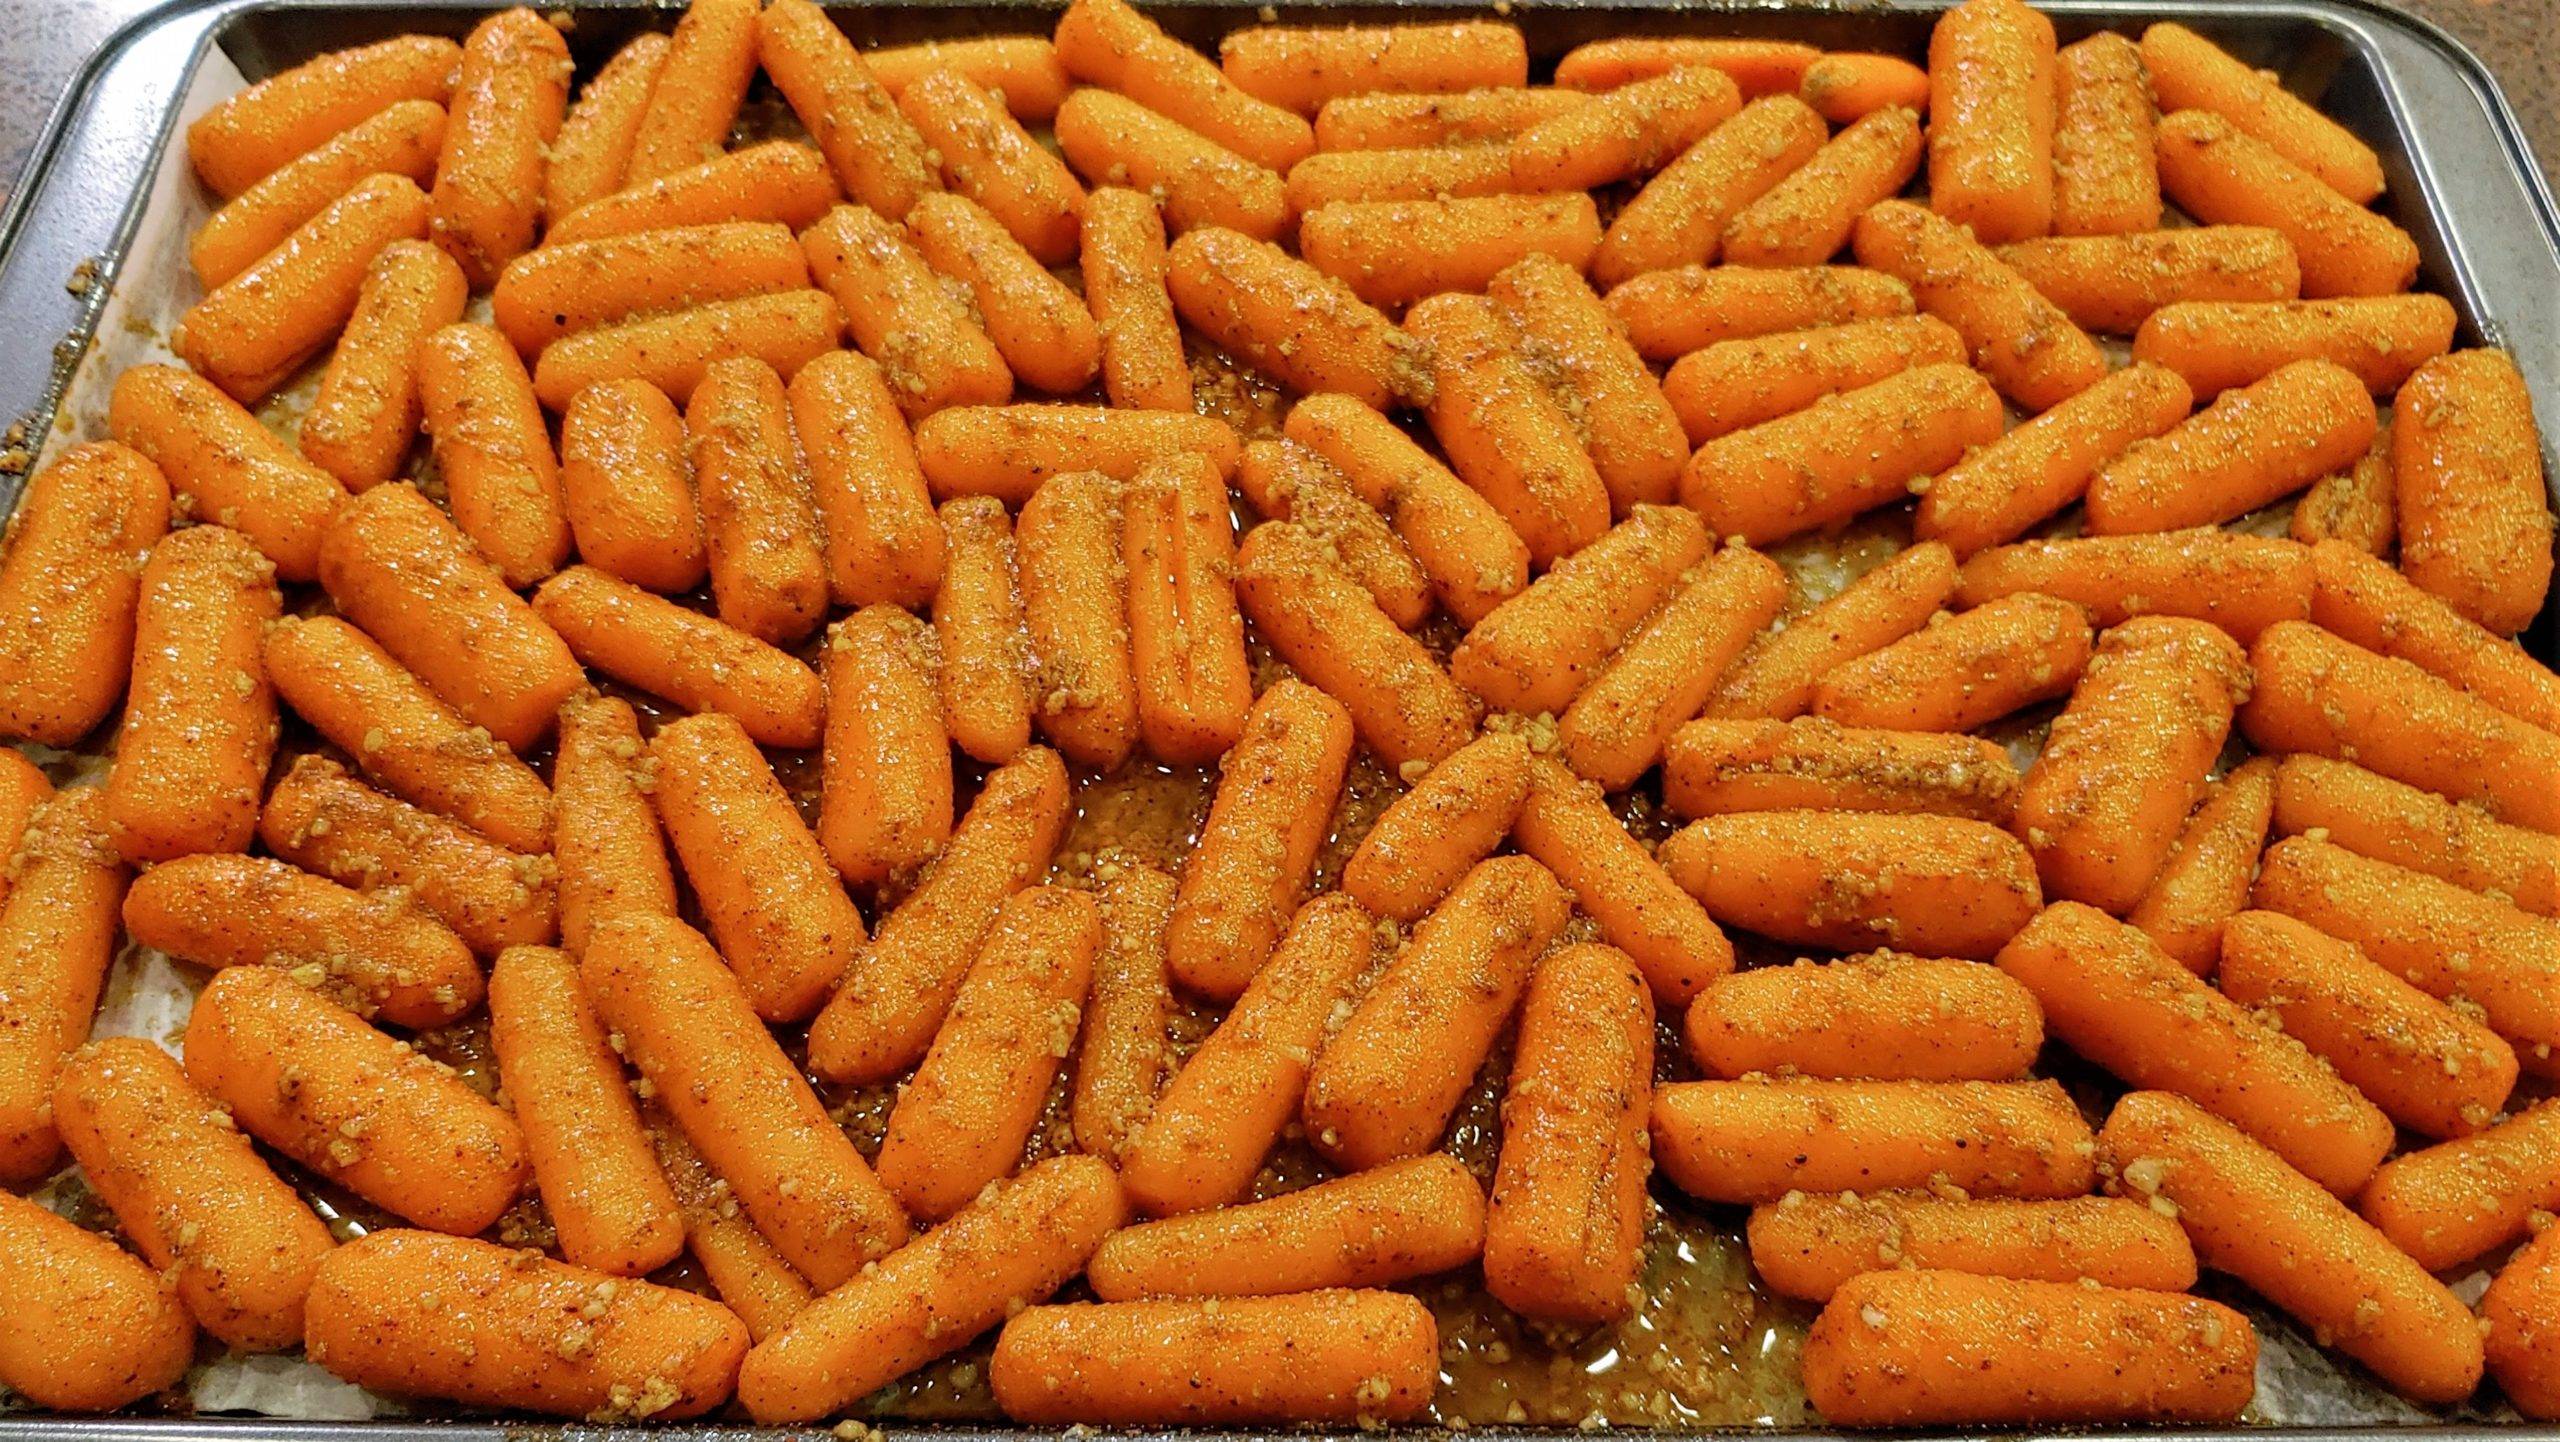 Roasted baby carrots - Dining in with Danielle